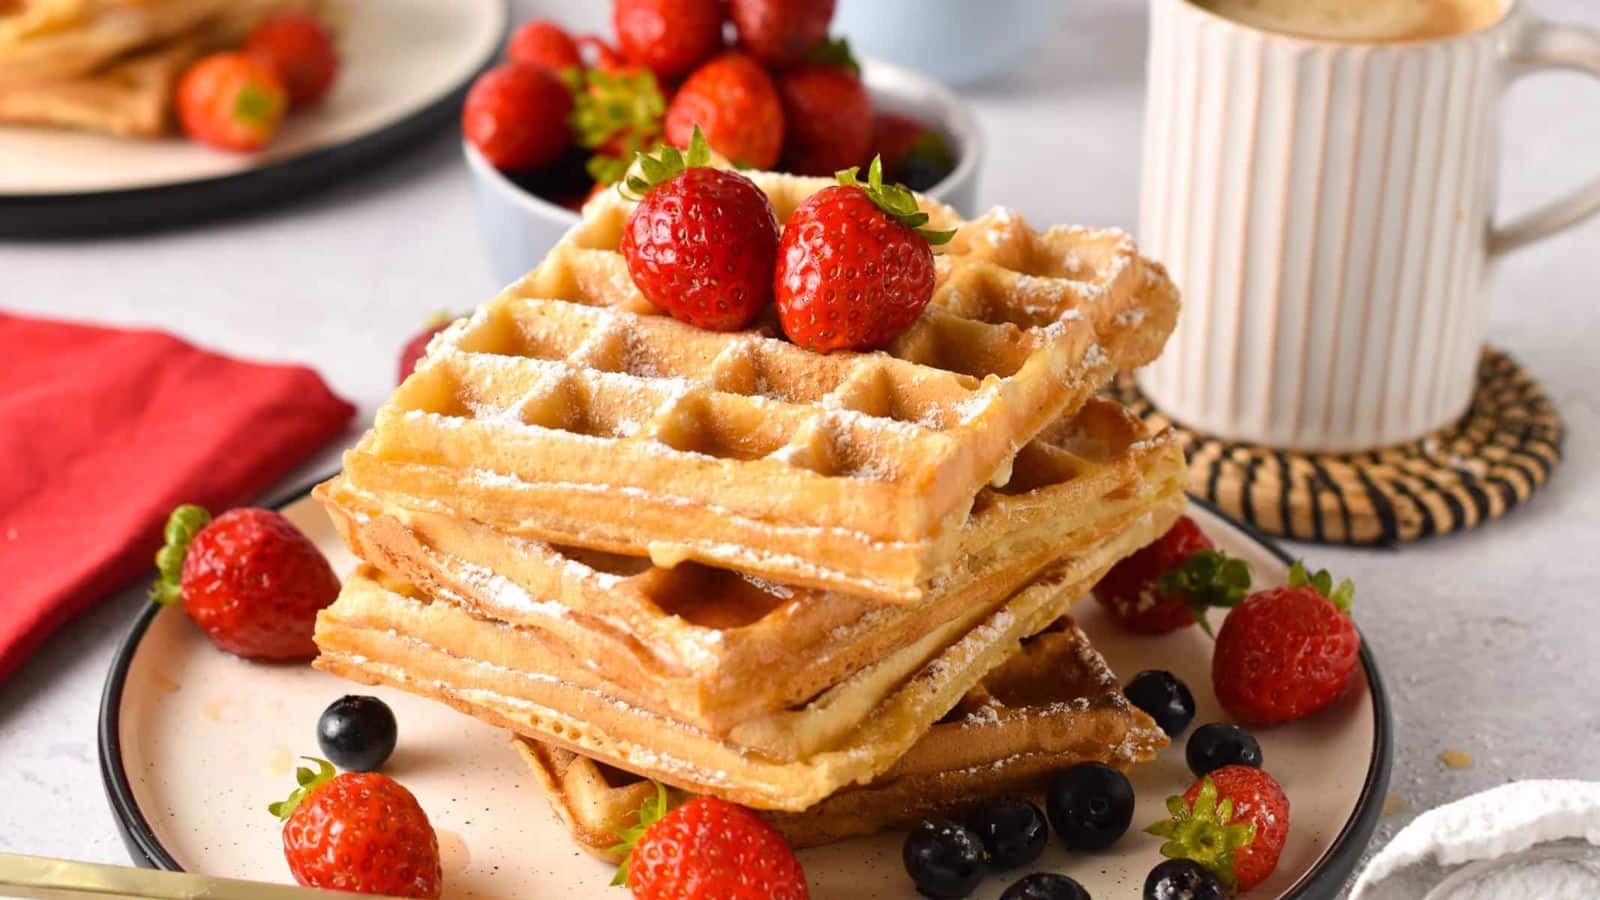 Recipe: Cook flavorsome Belgian waffles for a 'sweet' day